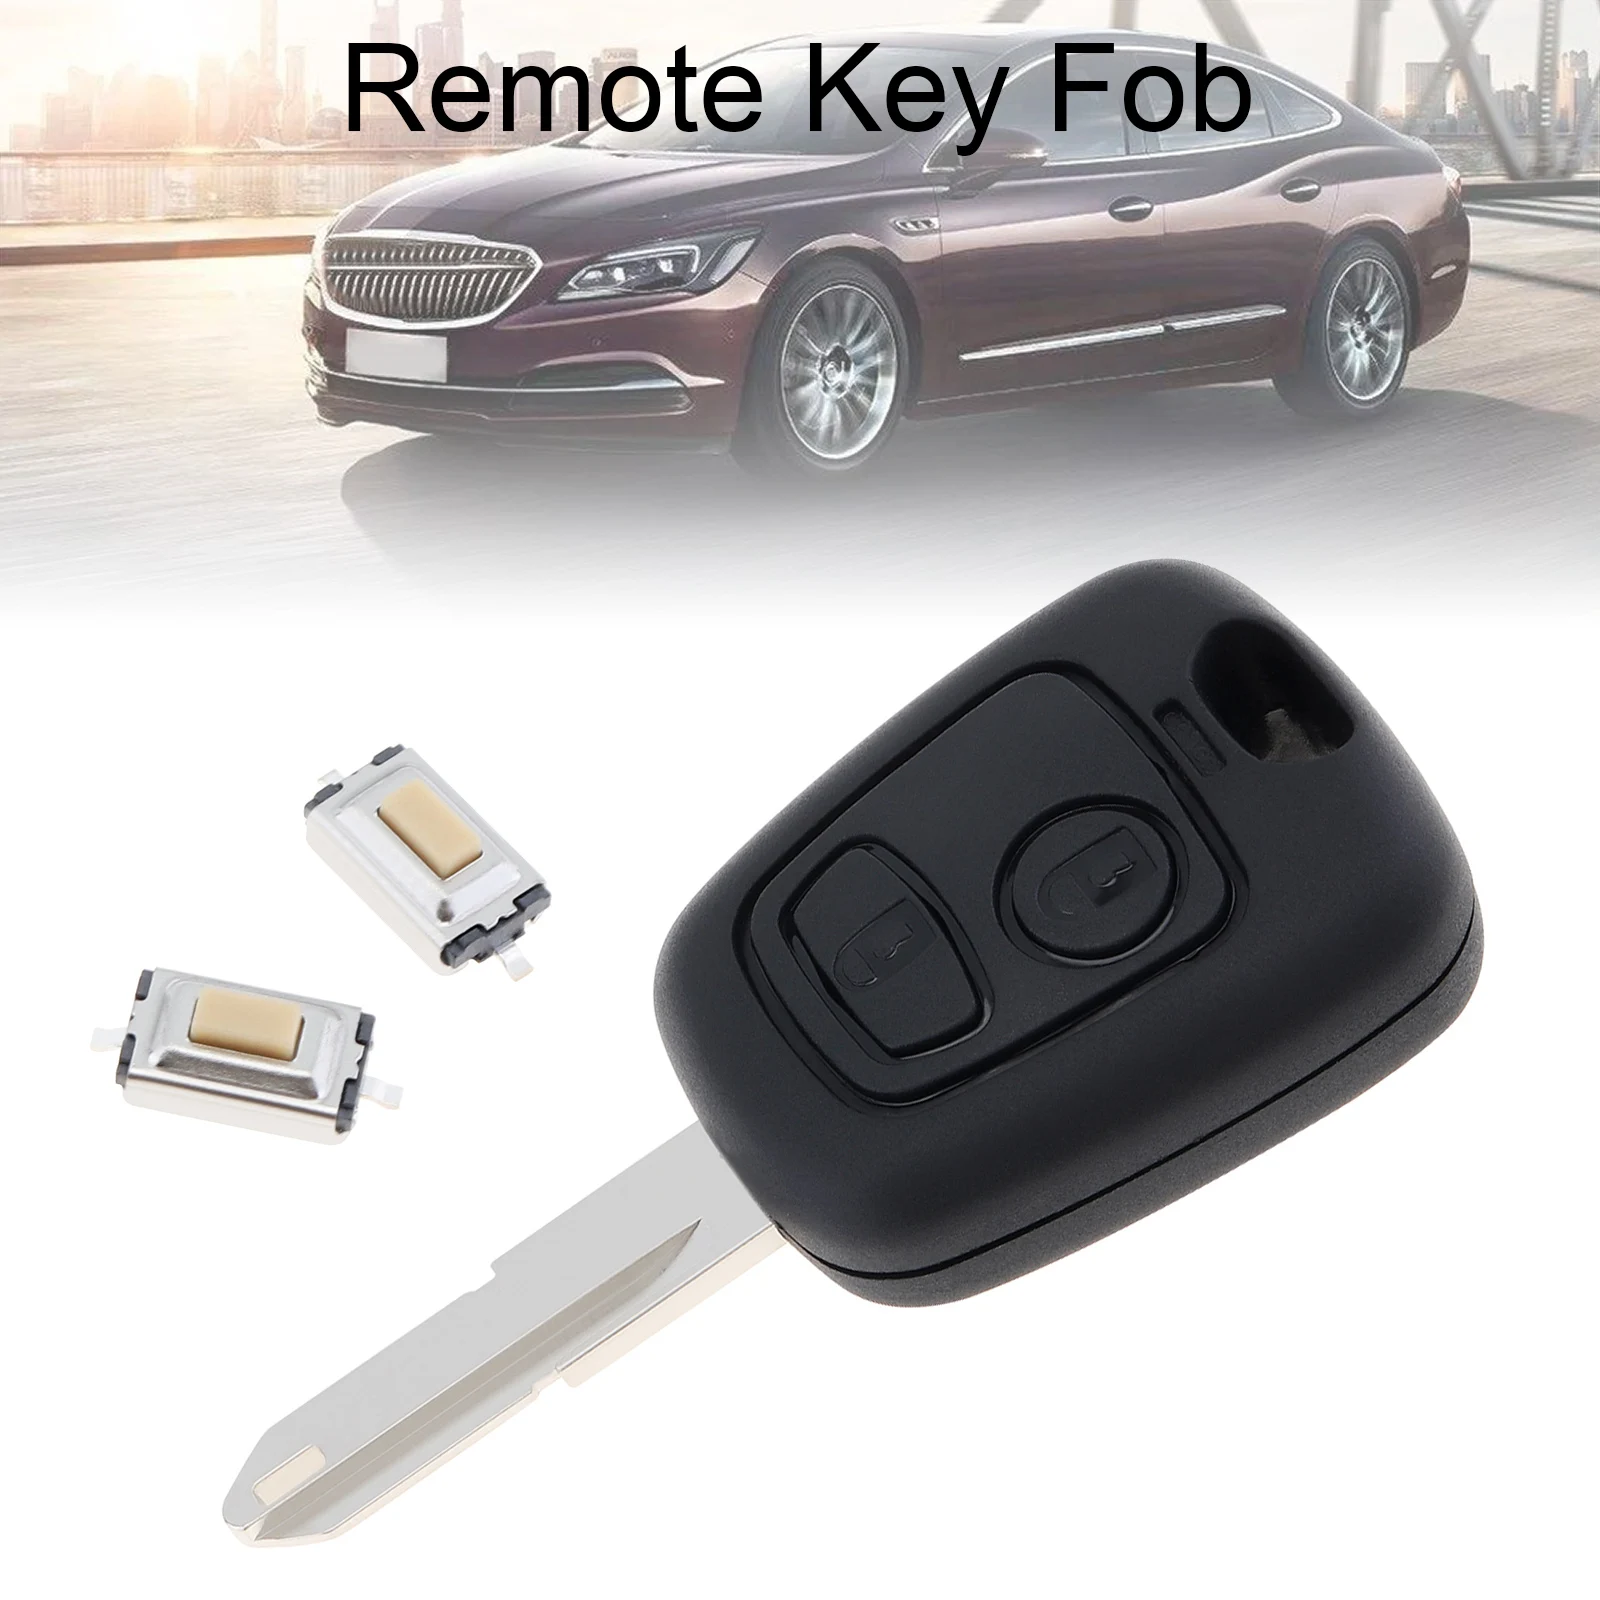 2 Buttons Car Remote Key Shell with 307/206 Blade for Citroen C1 / C2 / C3 / C4 / XSARA Picasso / Peug eot 307 / 107 / 207 / 407 remote key shell case fob side 2 buttons for citroen evasion synergie xsara xantia with blank blade